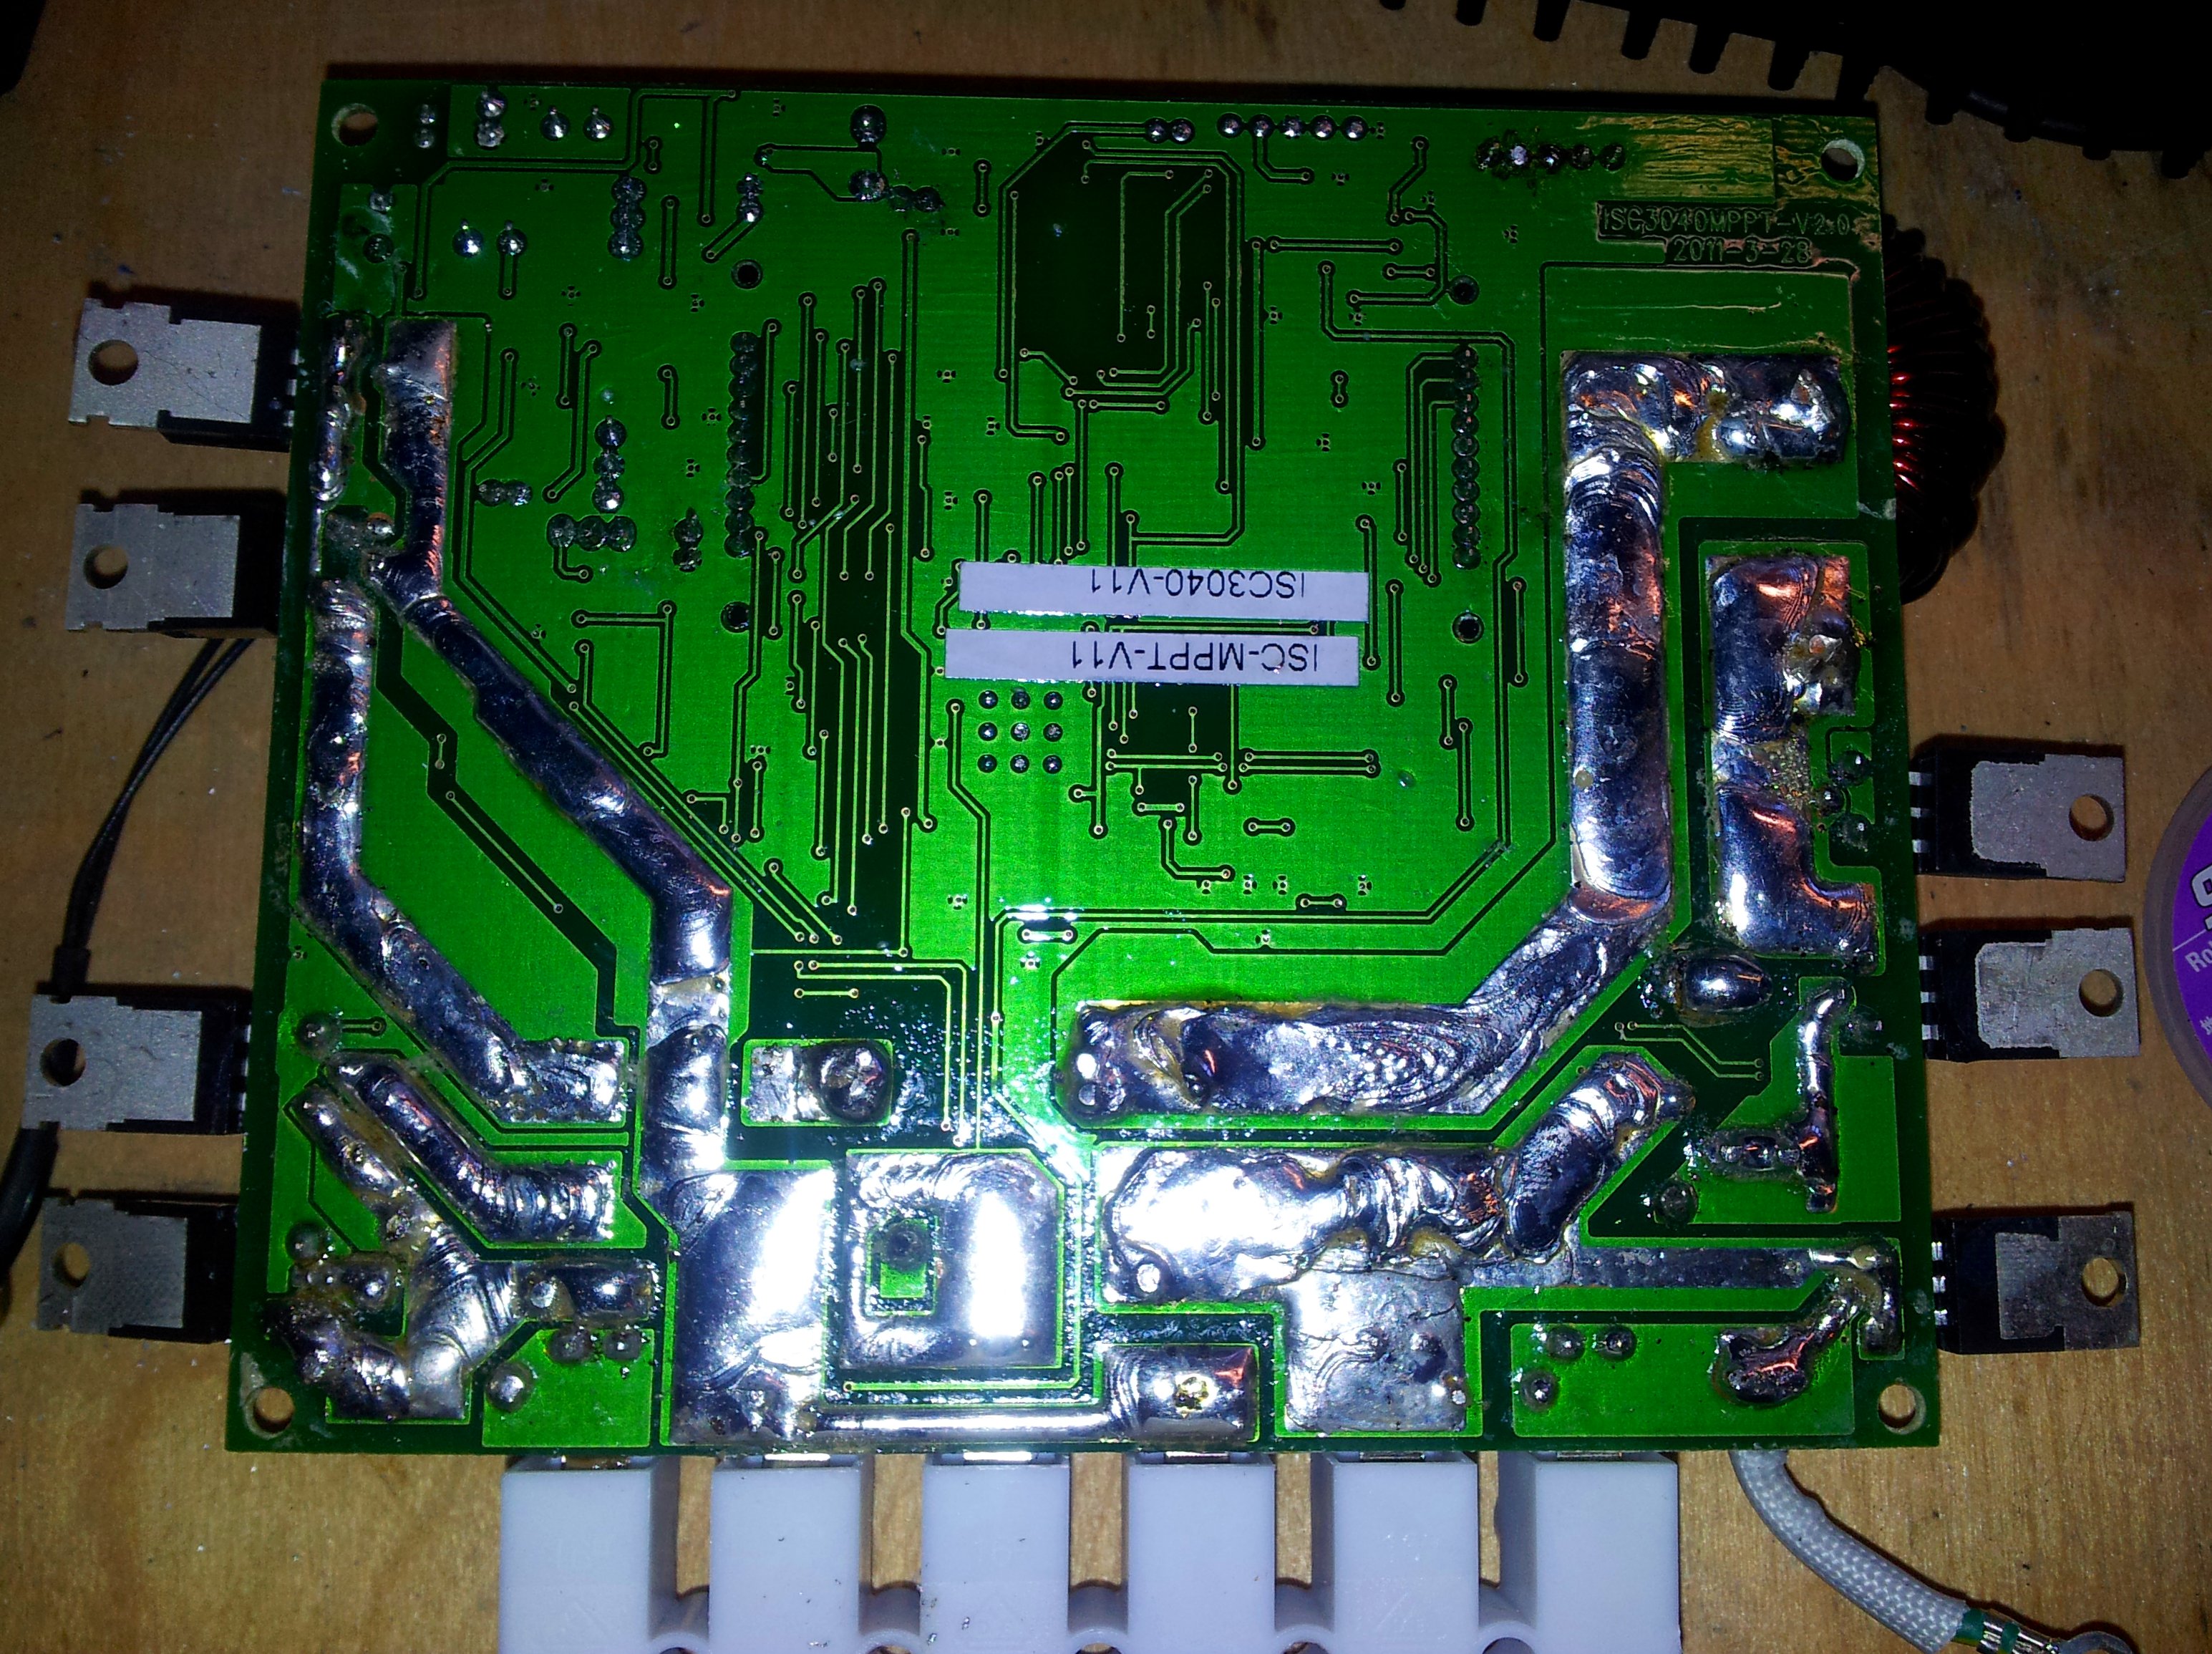 Back side of the PCB